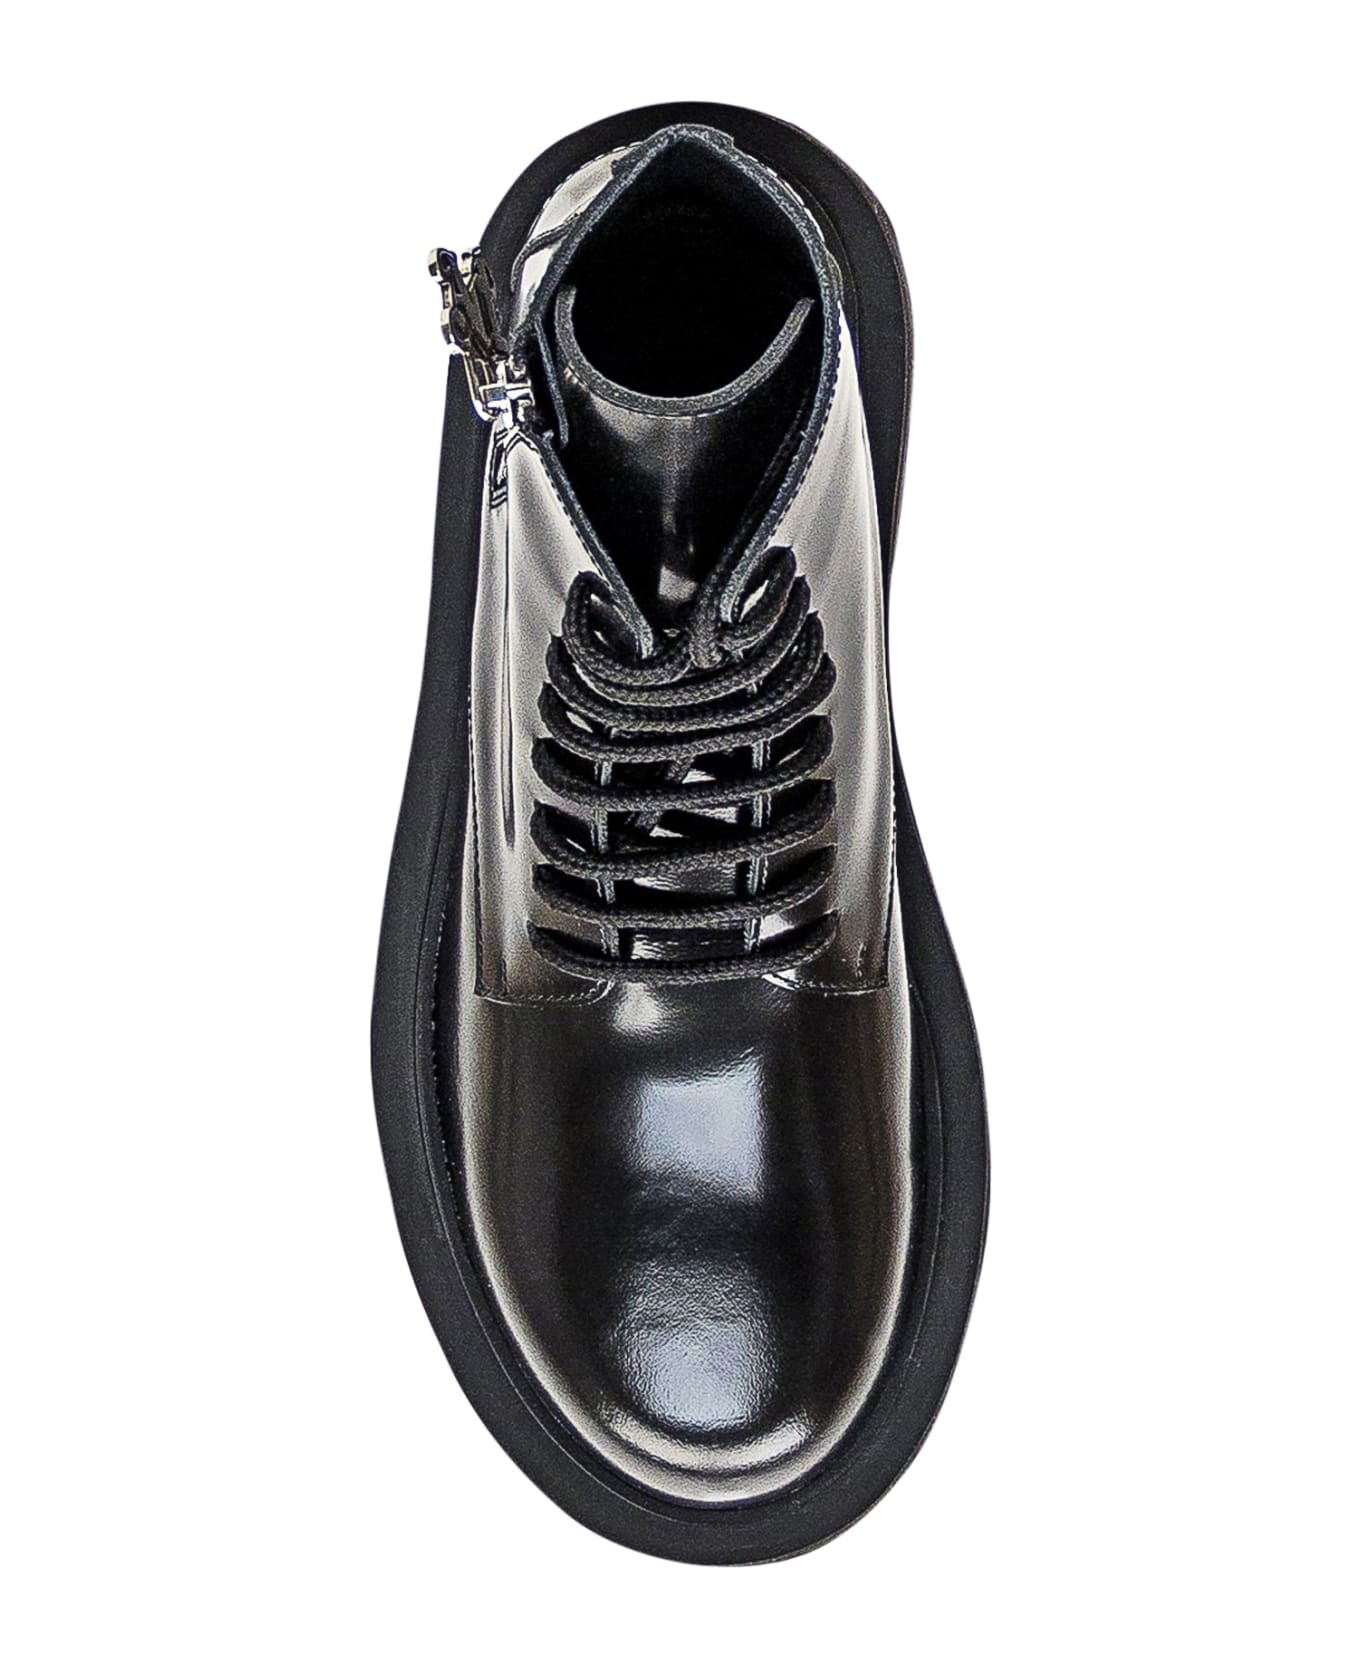 Palm Angels Combat Boots In Black Leather - Black ブーツ